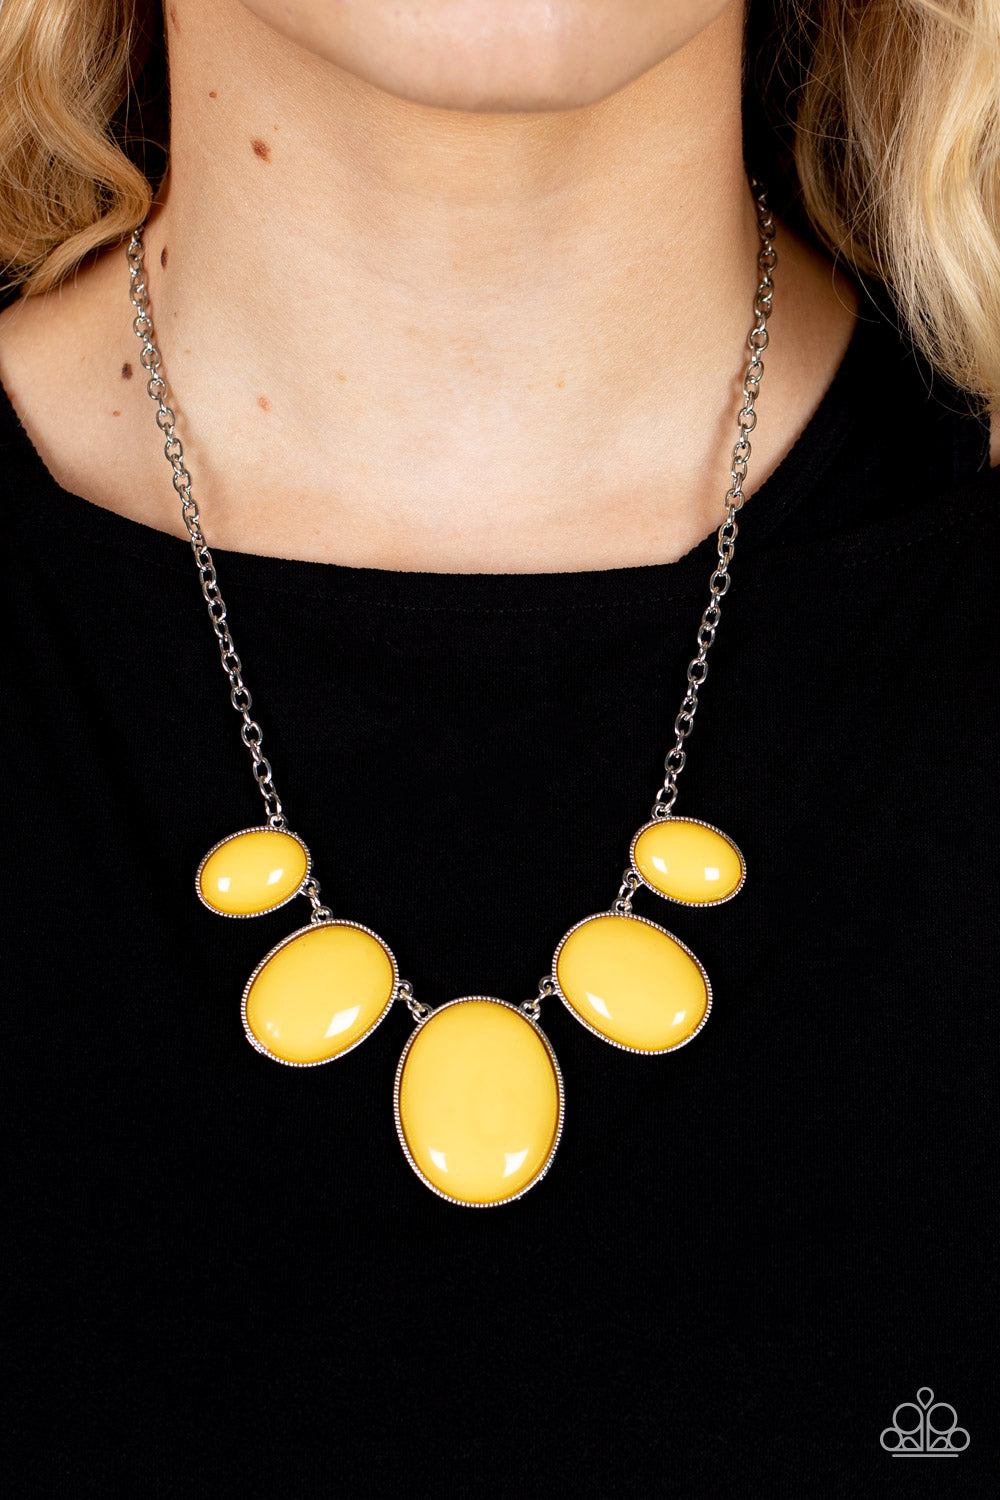 Vivacious Vanity Paparazzi Accessories Necklace with Earrings Yellow